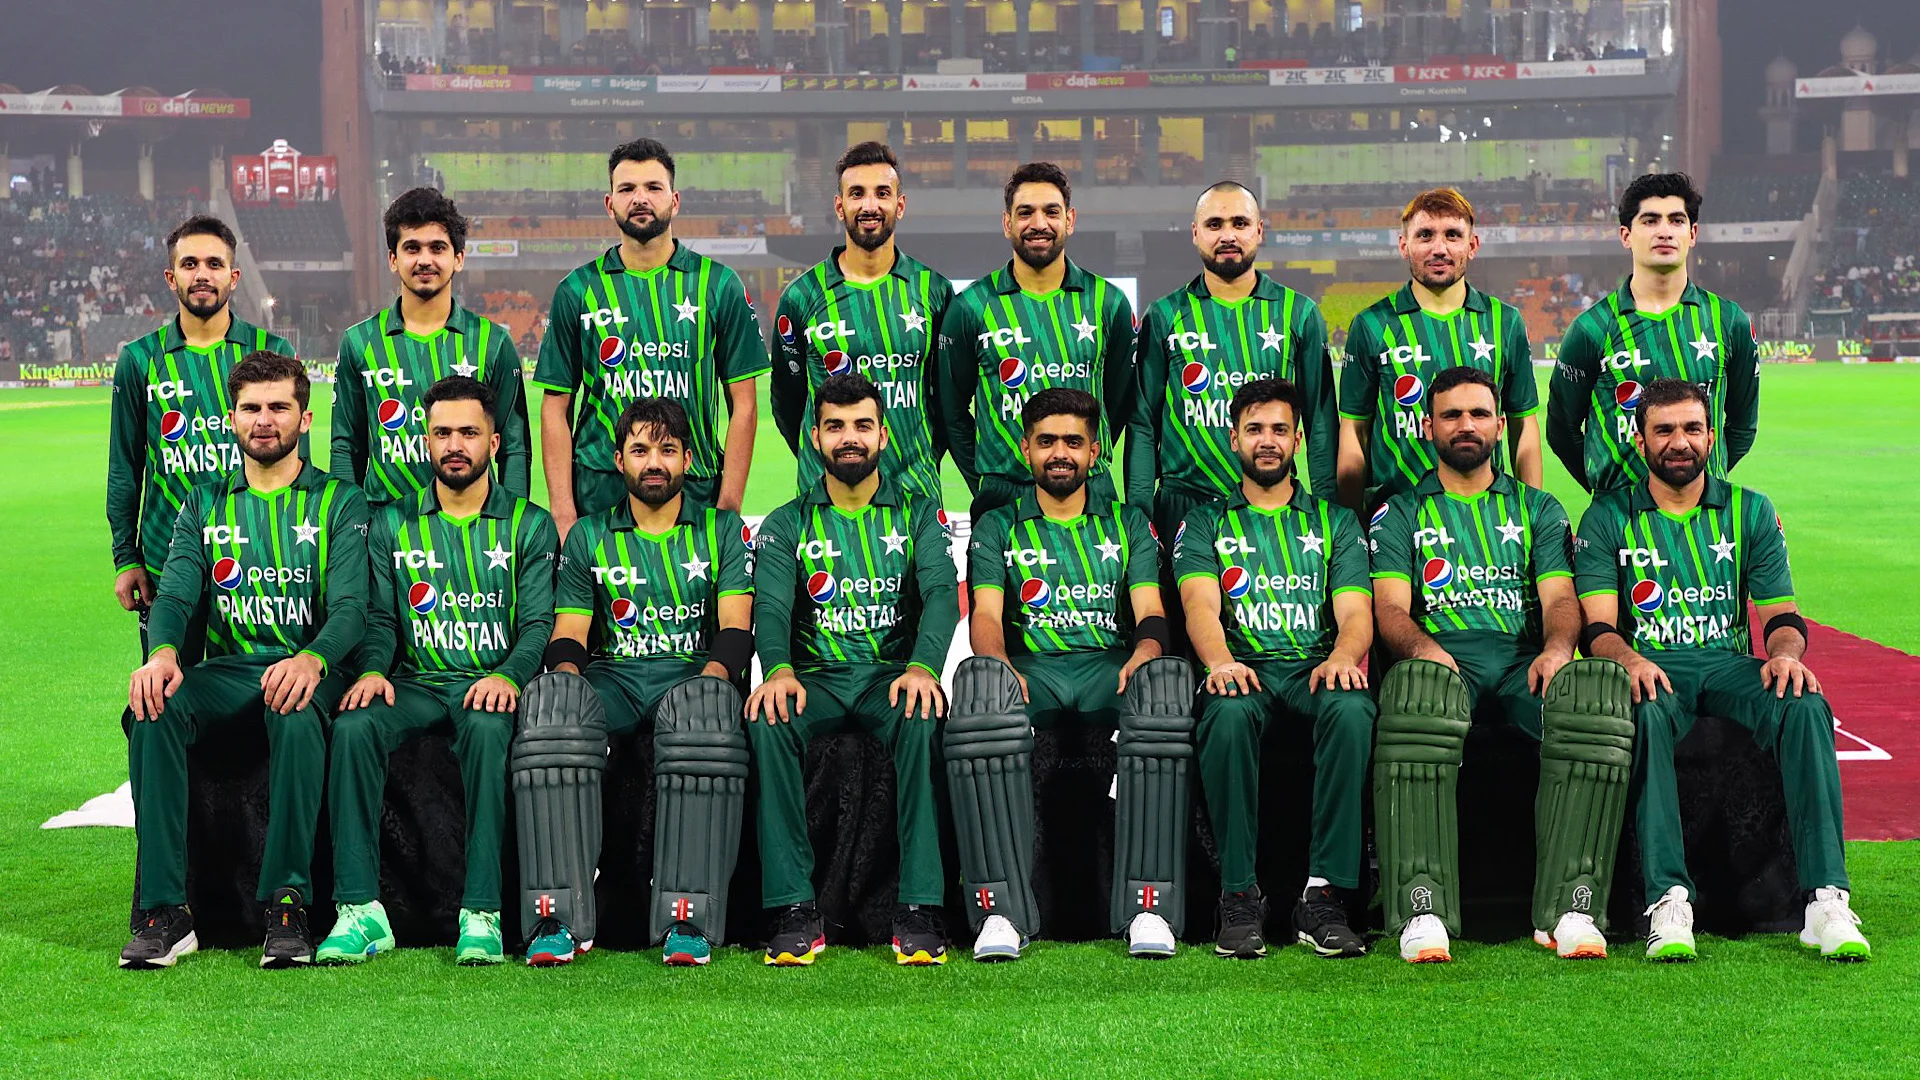 T20 world cup: Report reveals reasons behind Pakistan team’s poor performance